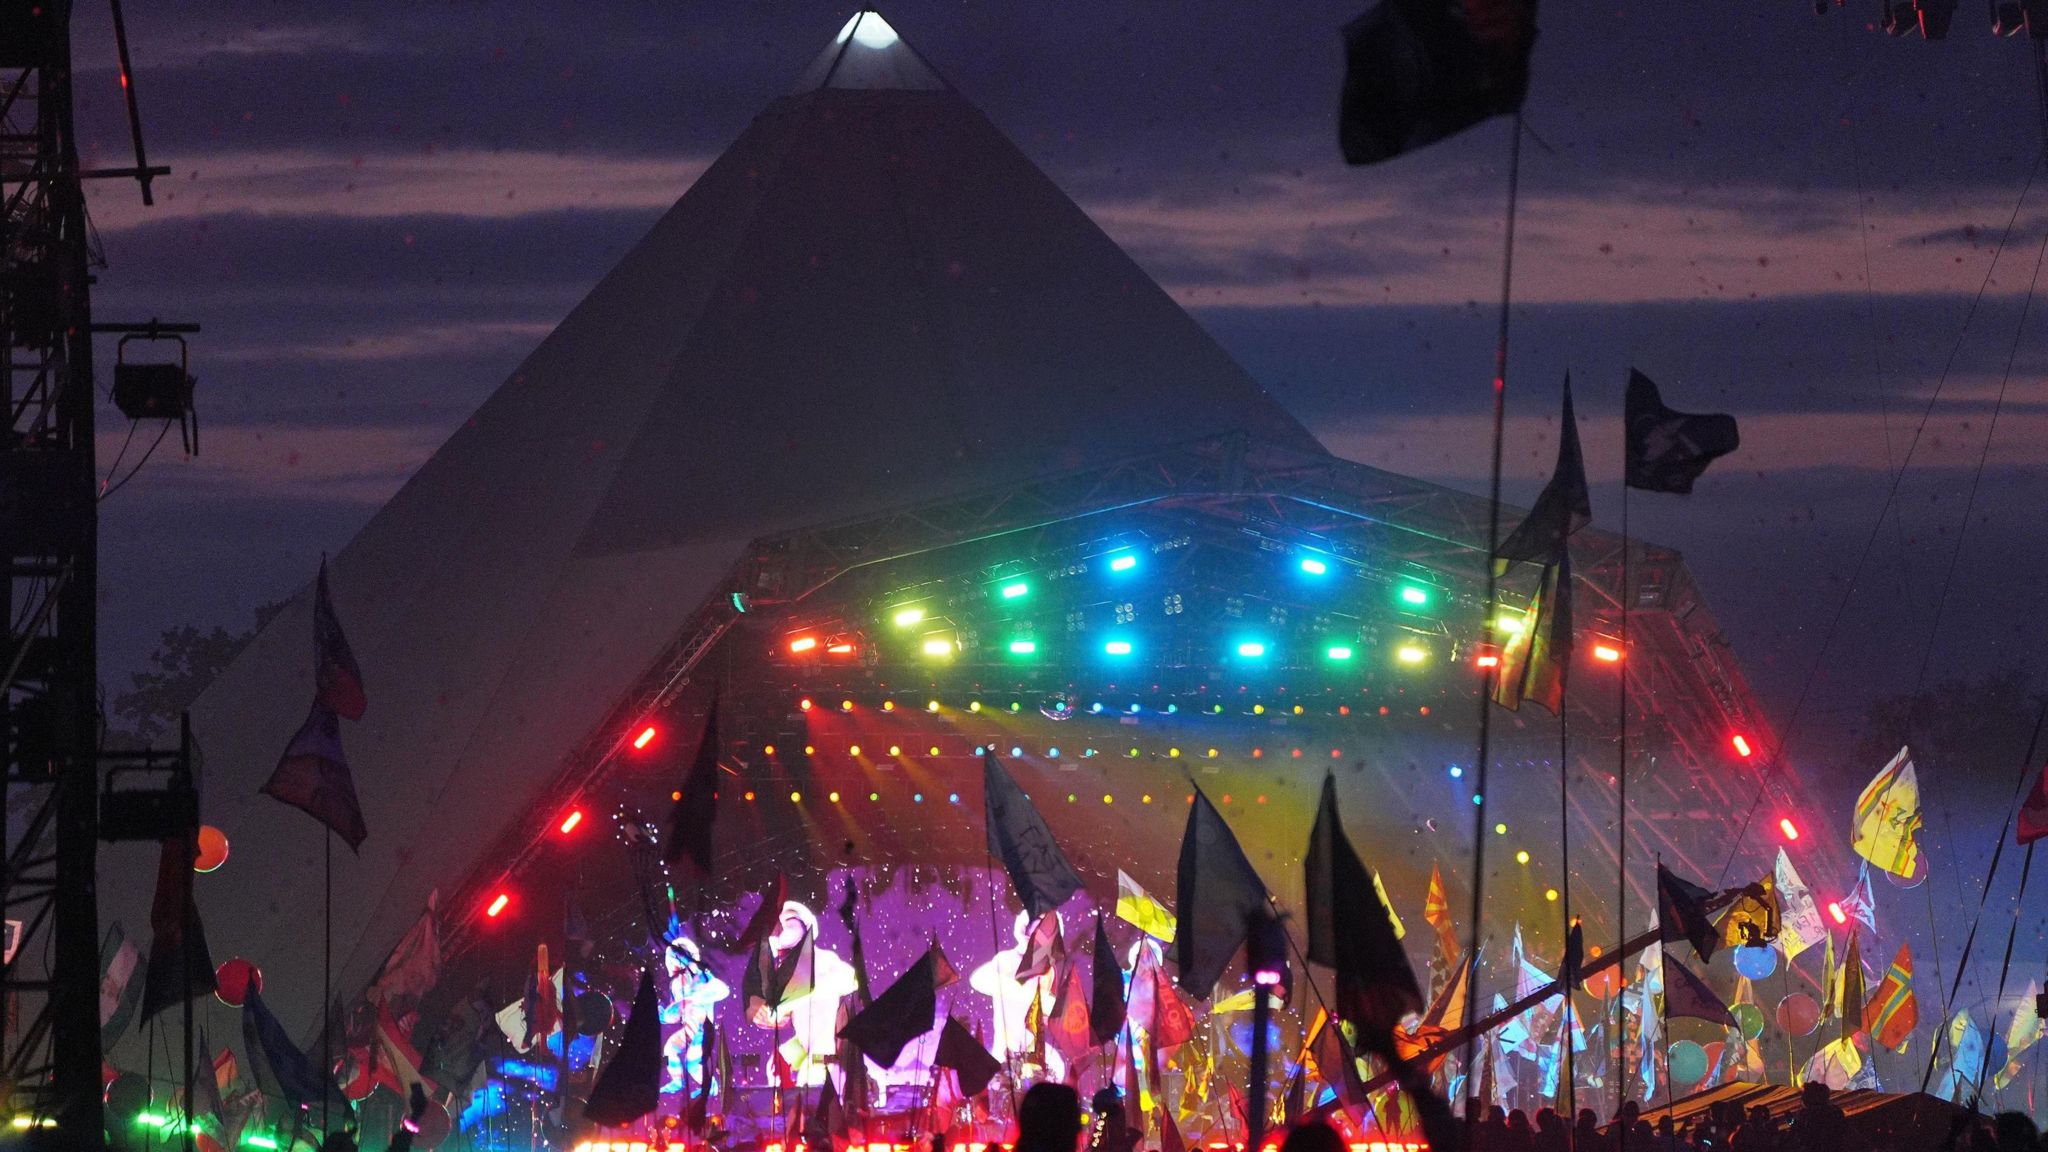 The Pyramid Stage at Glastonbury Festival during the Coldplay show. It is covered with a rainbow of lights as members of the crowd wave flags in front of it.